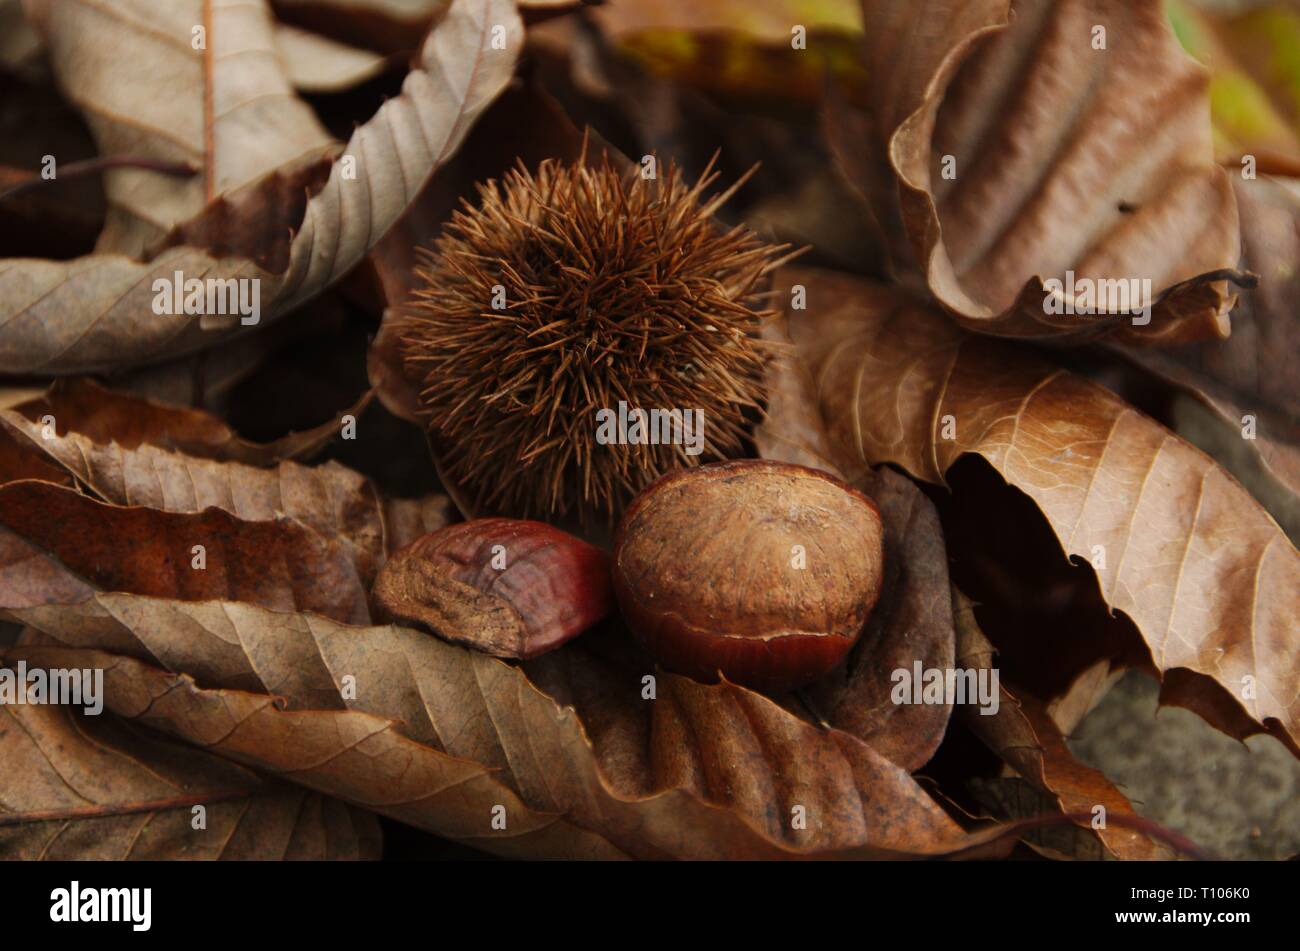 Seasonal chestnuts showing the development stages of this traditional autumn food. Stock Photo